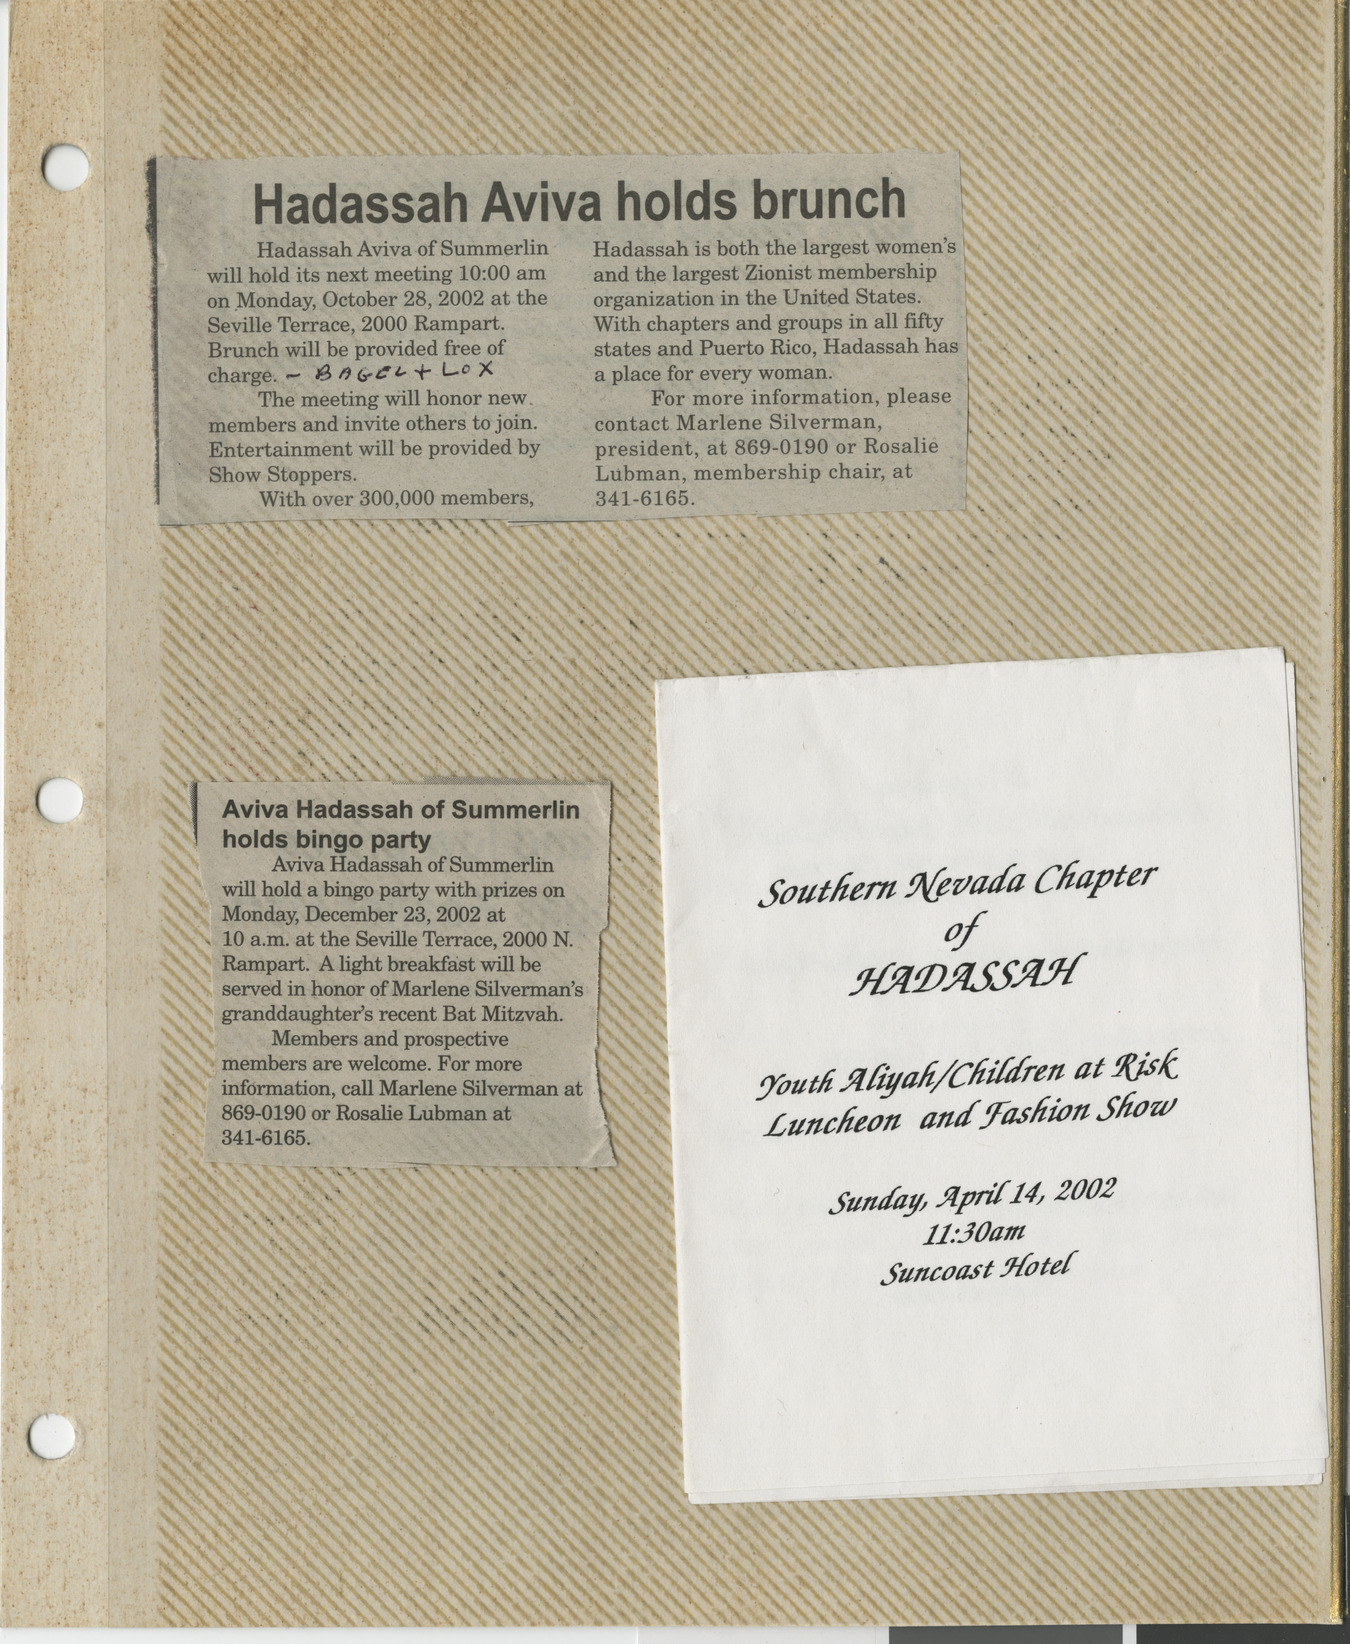 Newspaper clippings for Hadassah events, and invitation to Youth Aliyah luncheon, April 14, 2002